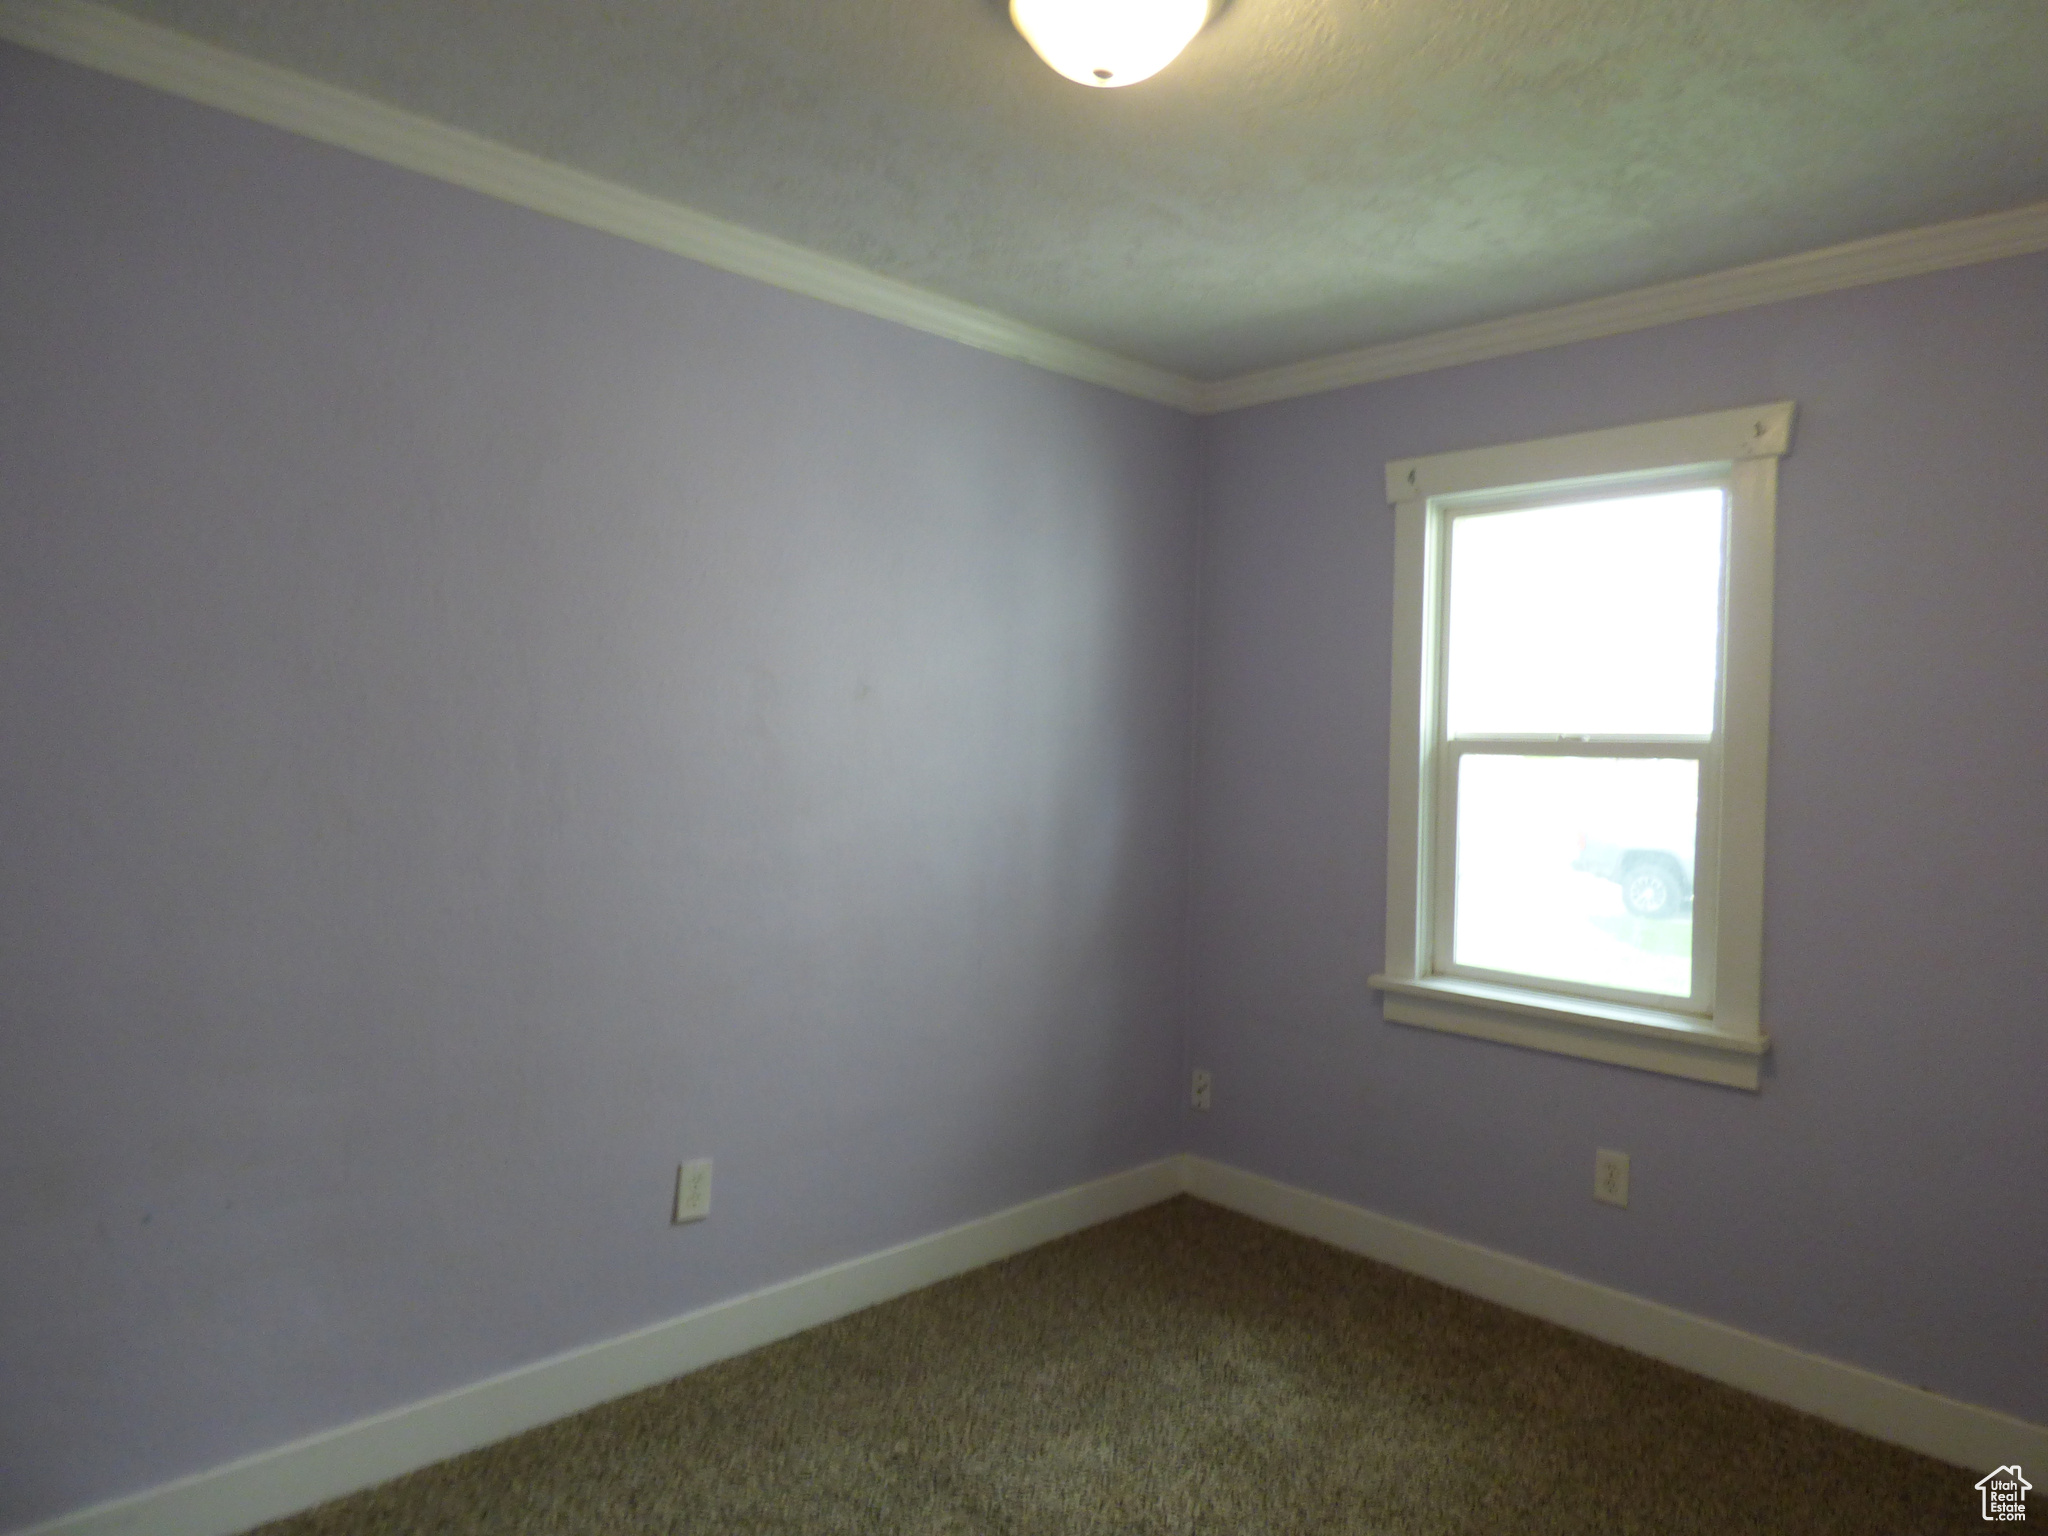 Unfurnished room with ornamental molding, plenty of natural light, and carpet